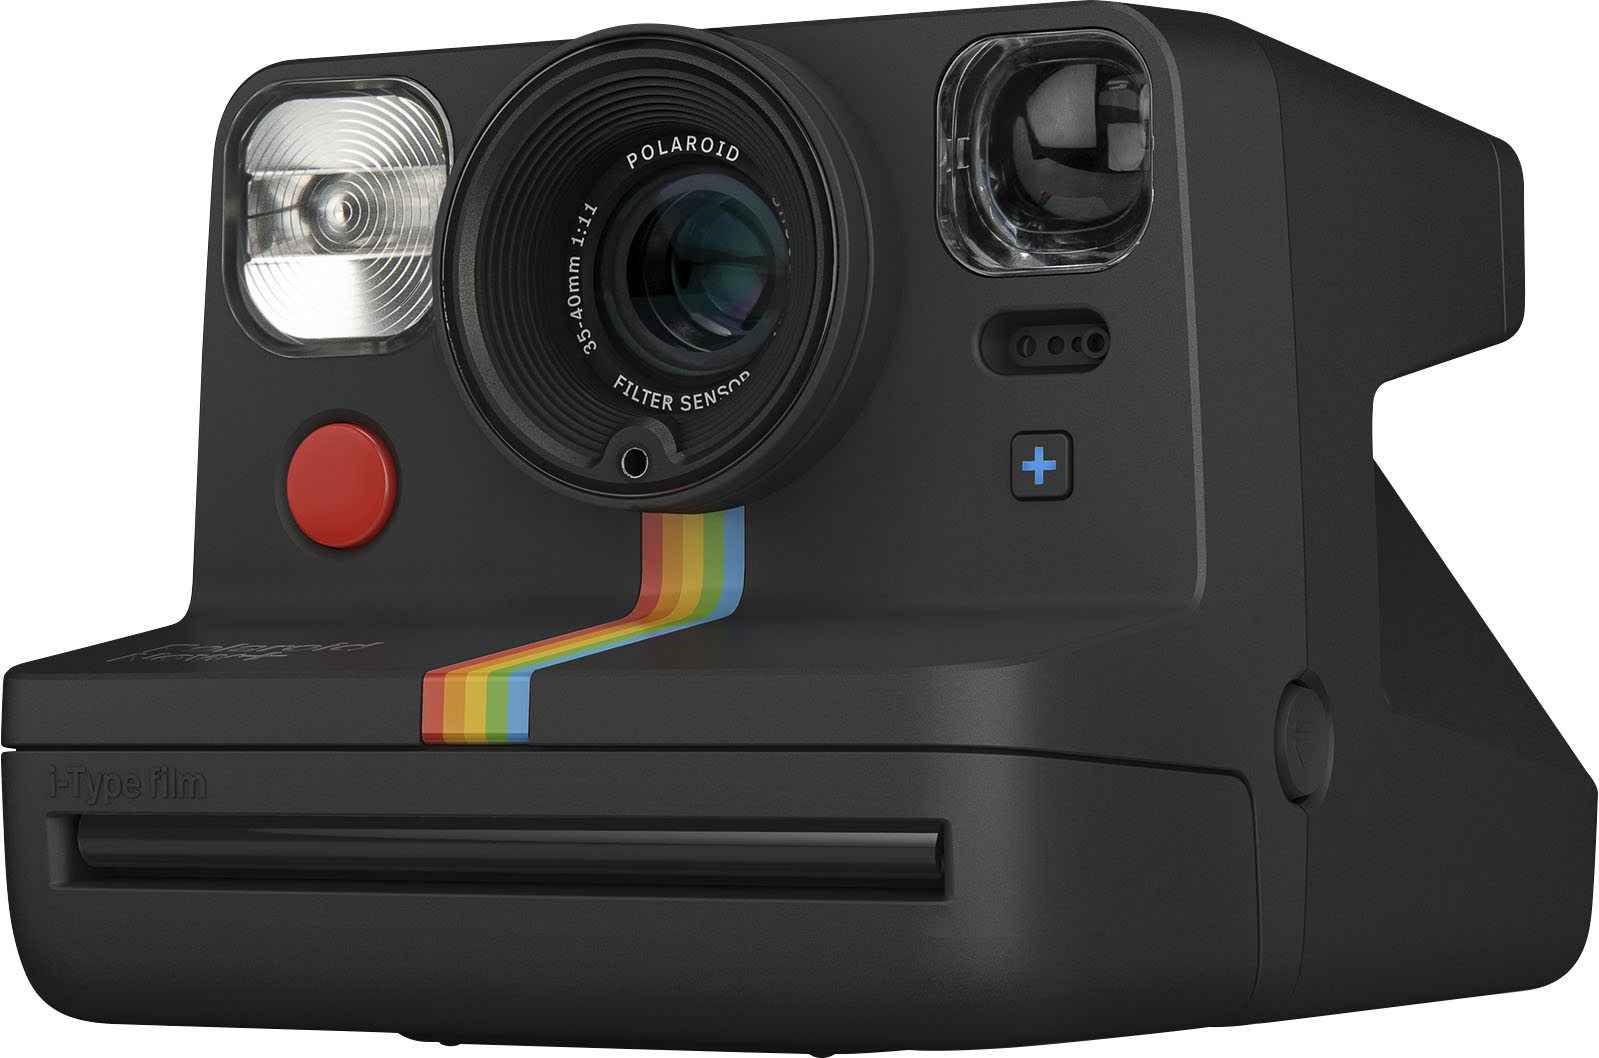 Ananiver Simulate Mark down Polaroid Now+ 9061 - Best Buy